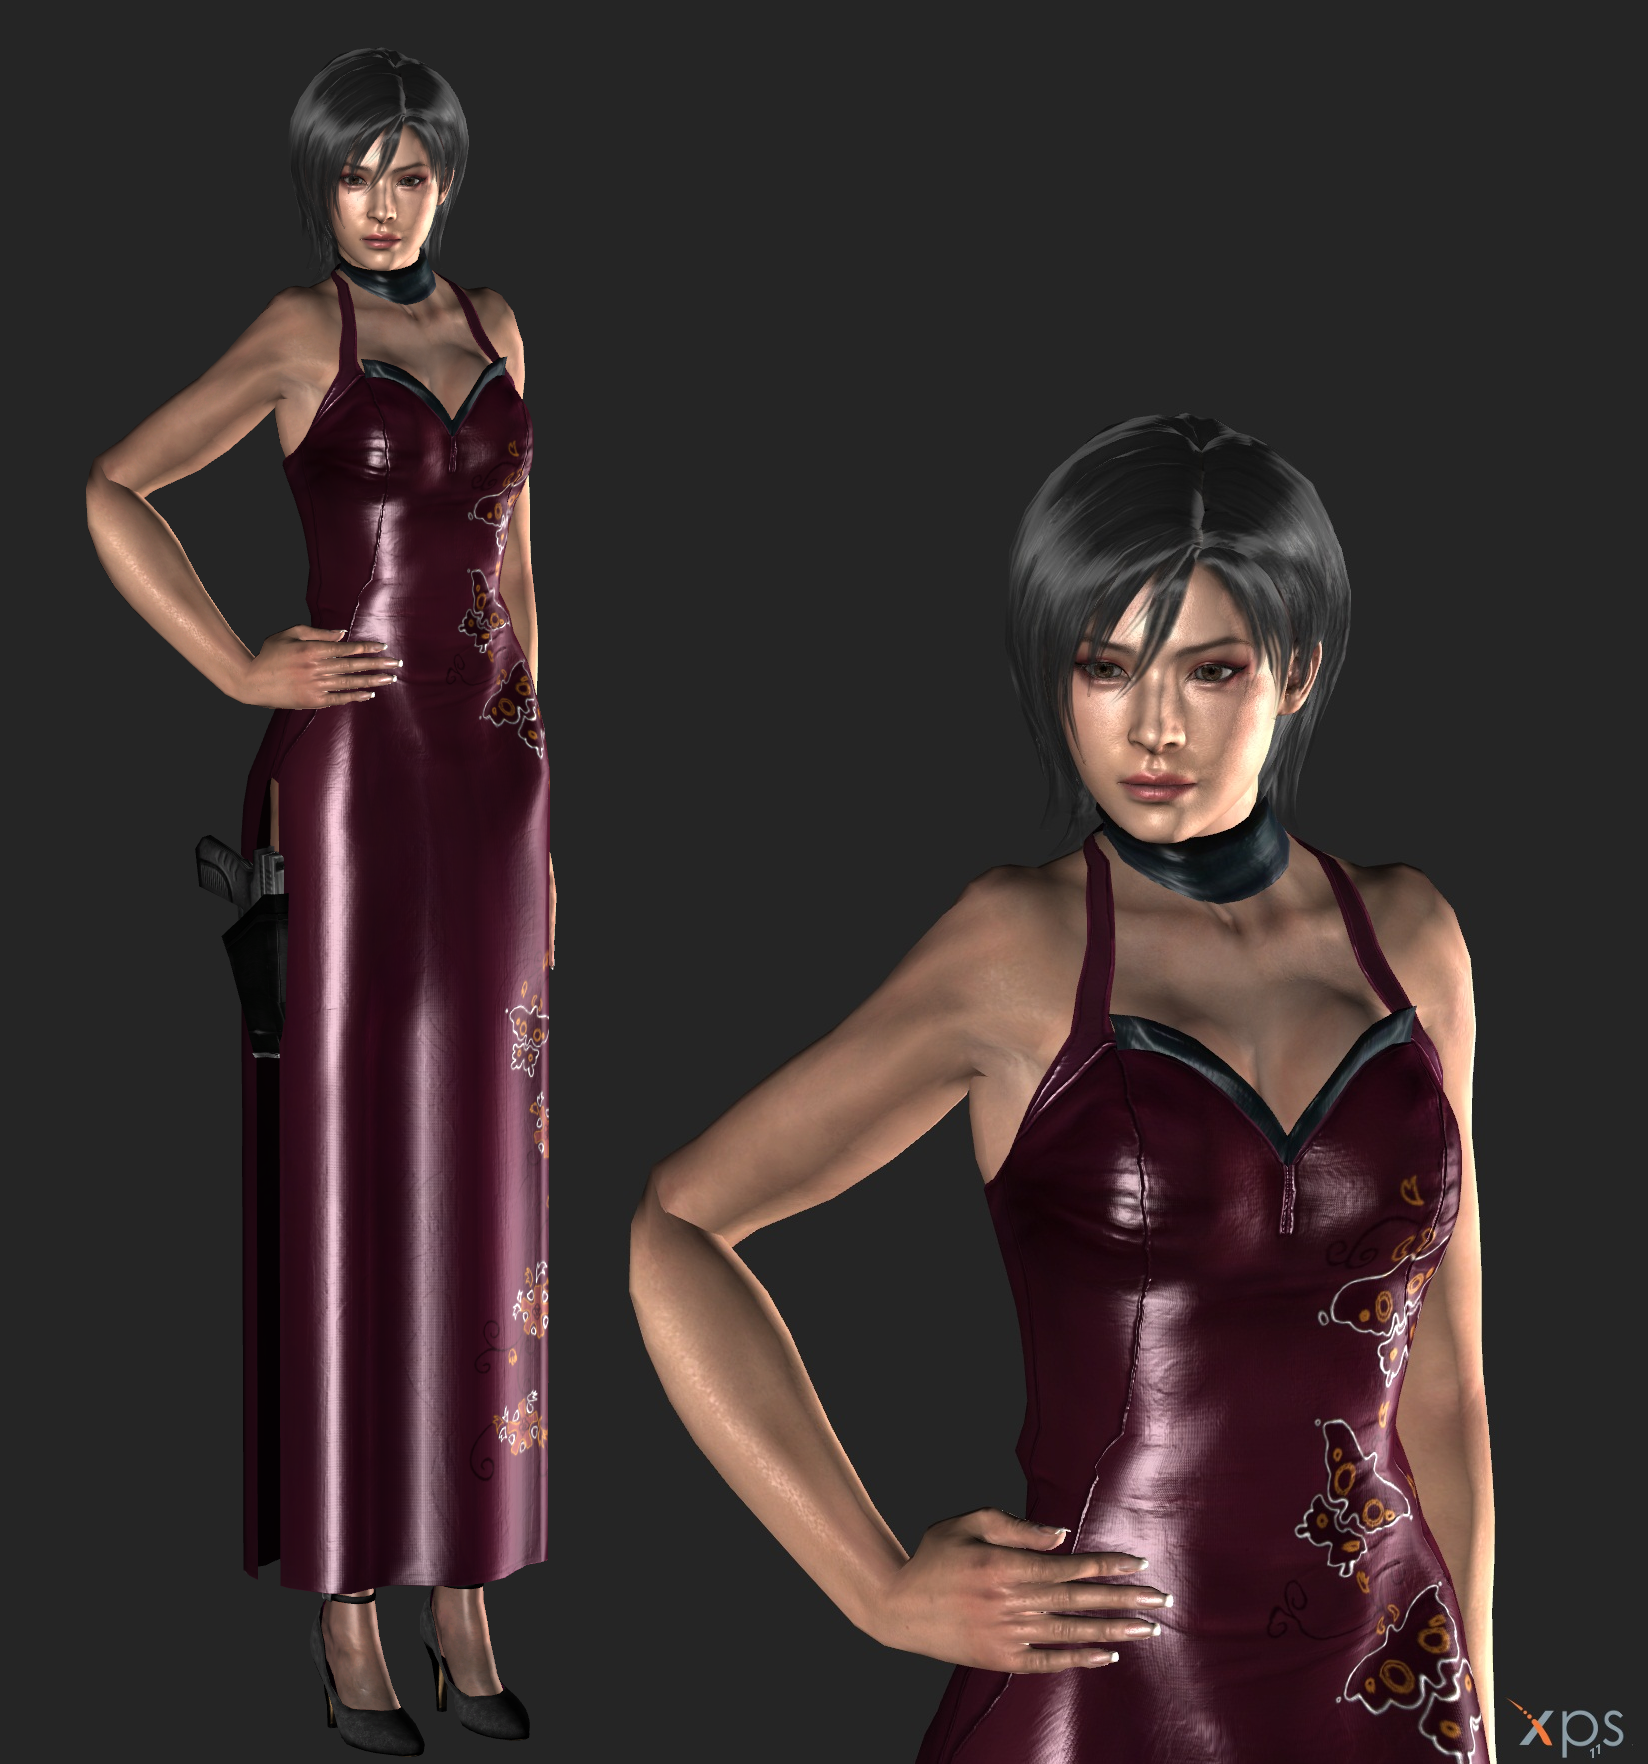 Ada Wong in the chinese dress RE4 original and remake (art by @adaleonwong)  : r/residentevil